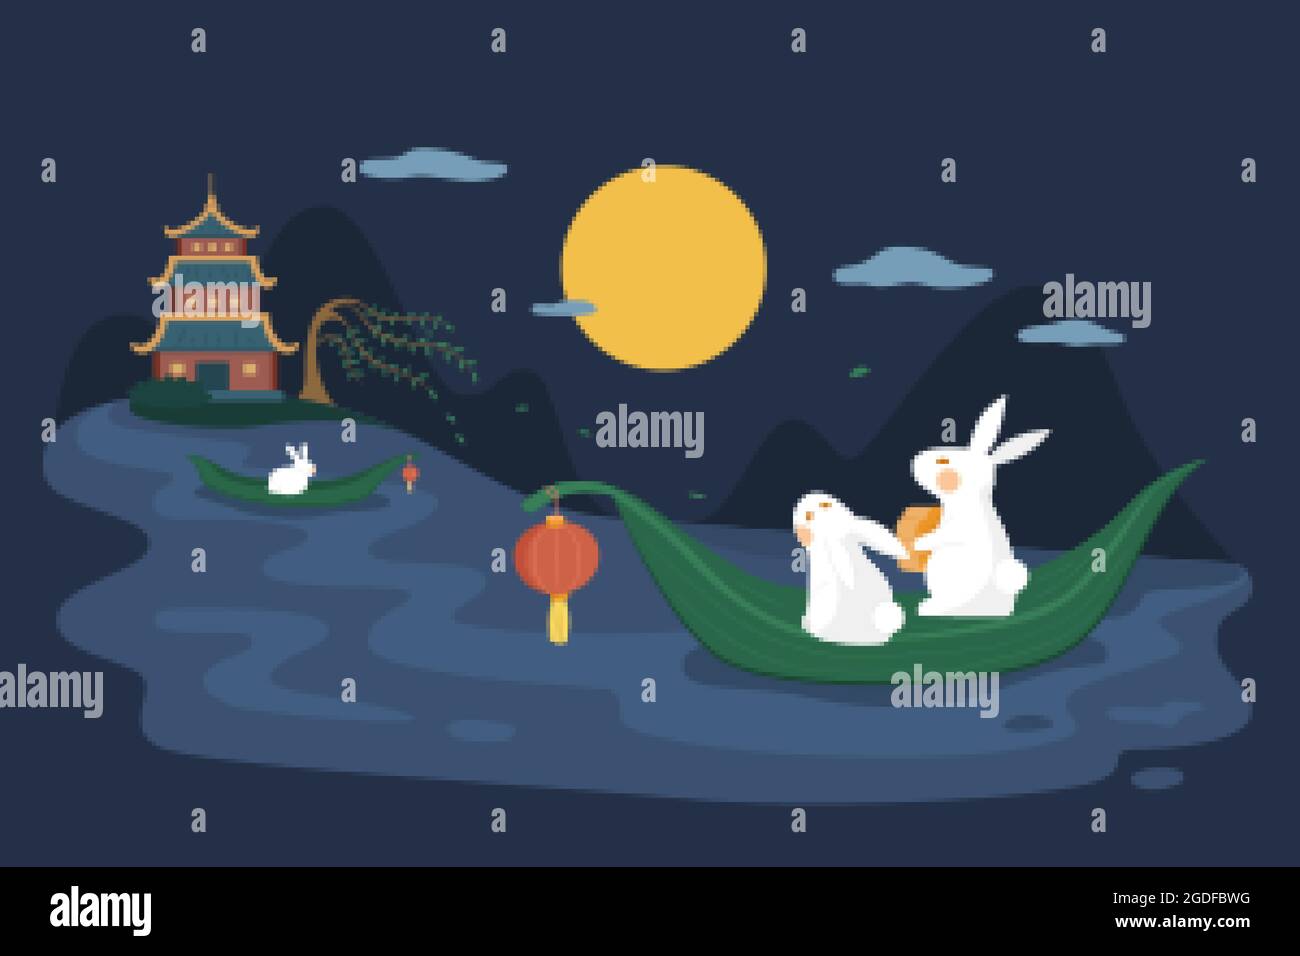 Mid autumn festival design. Flat illustration of jade rabbits drifting on a river and watching moon at night as holiday celebration Stock Vector